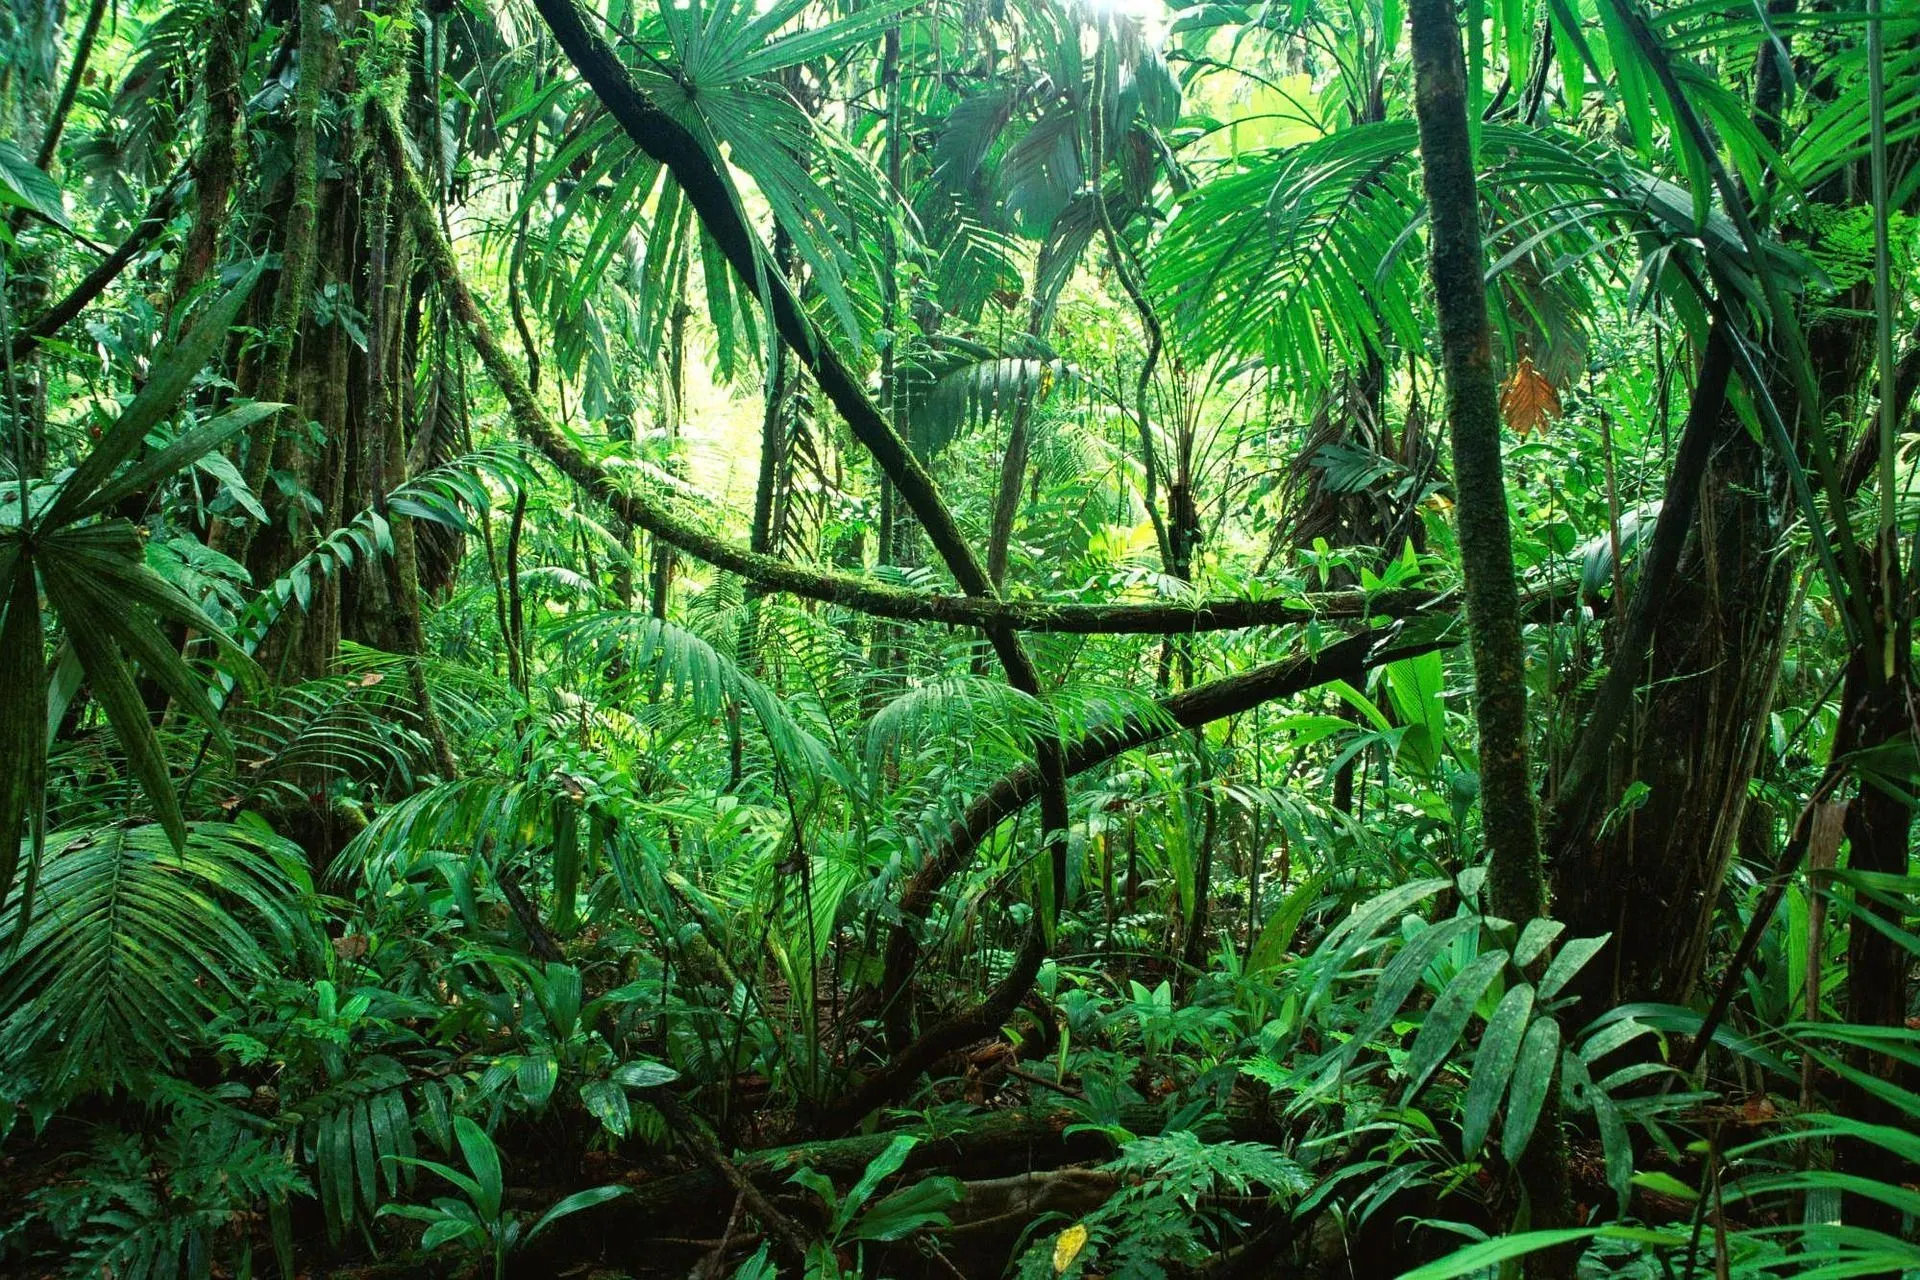 What do you know about a jungle vs a forest. Jungles have massive undergrowth of shrubs and vines.